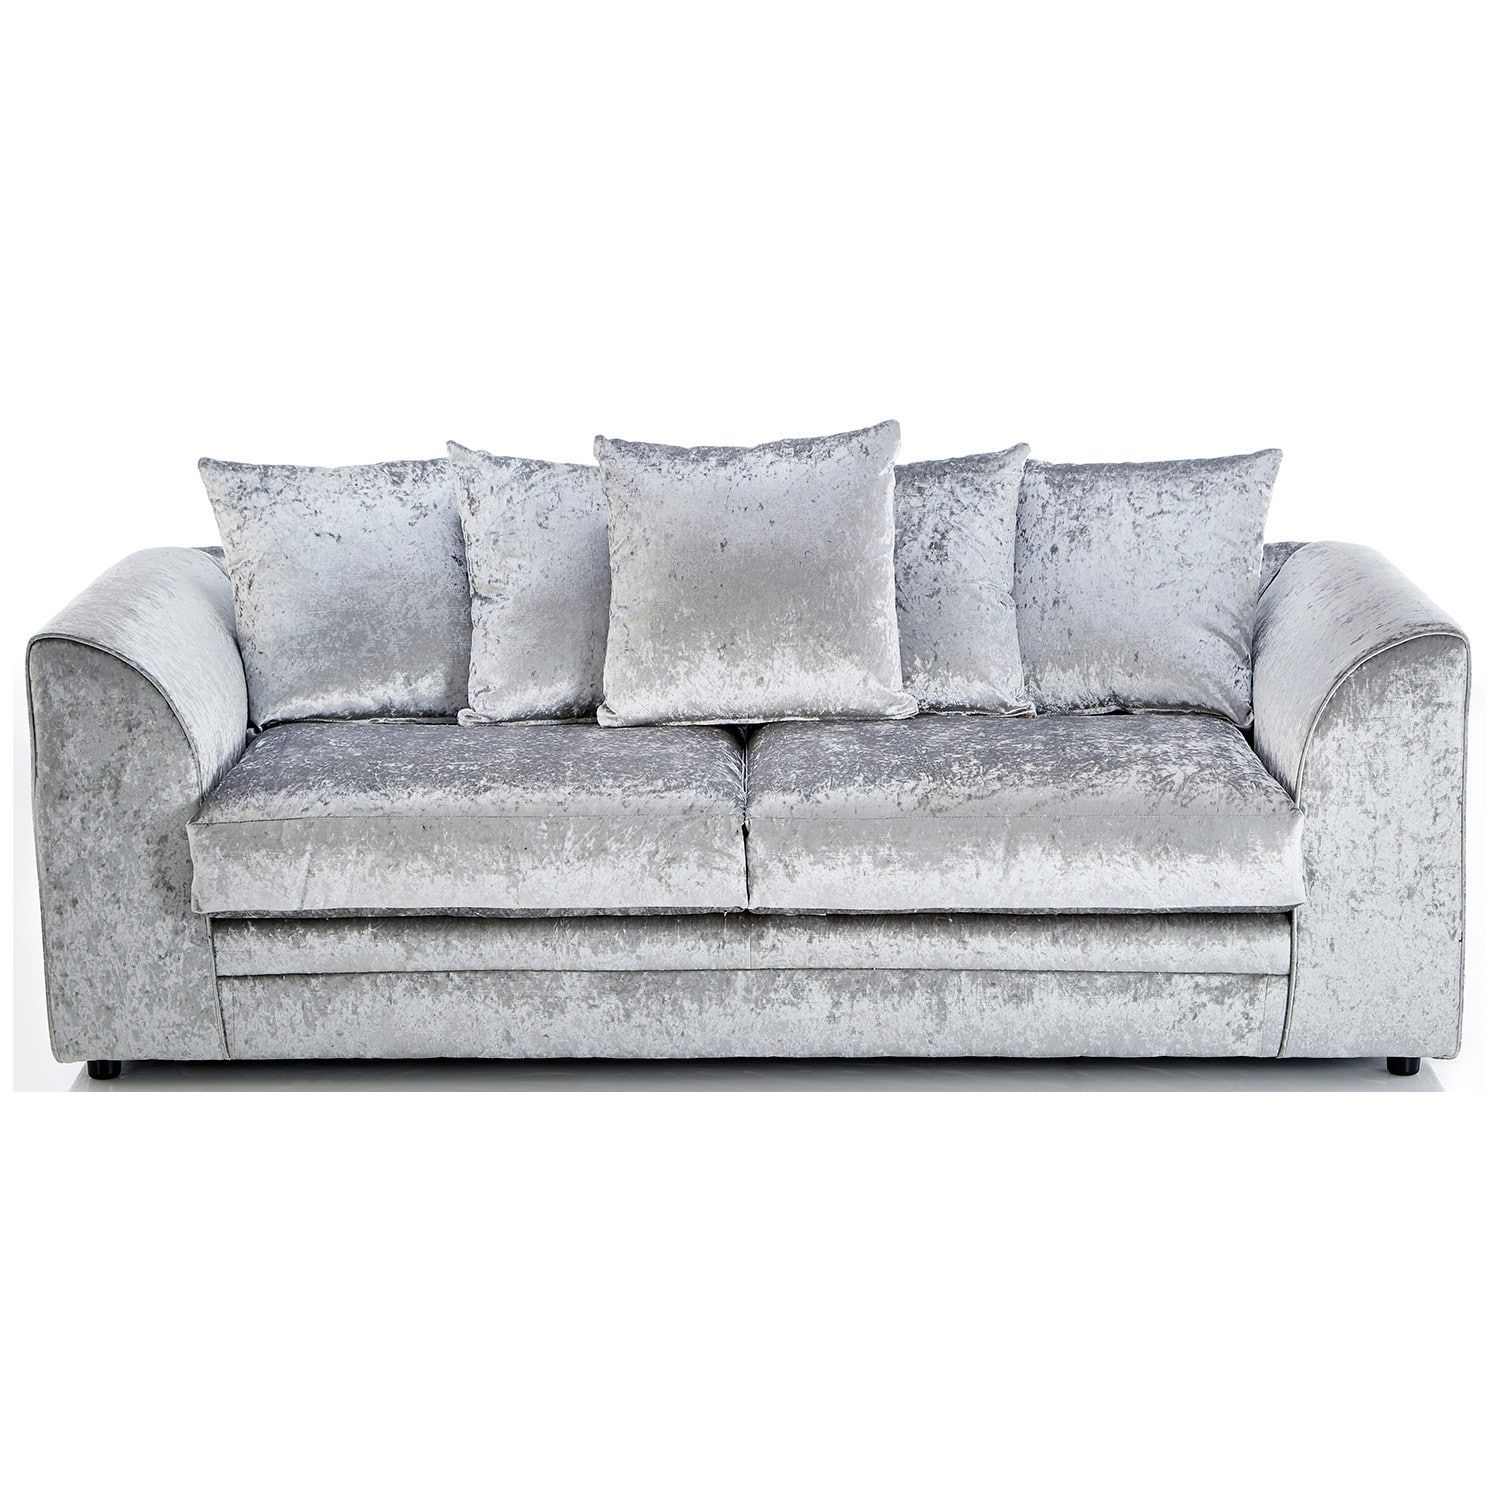 Crushed Velvet Furniture | Sofas, Beds, Chairs, Cushions With Velvet Sofas (Photo 1 of 10)